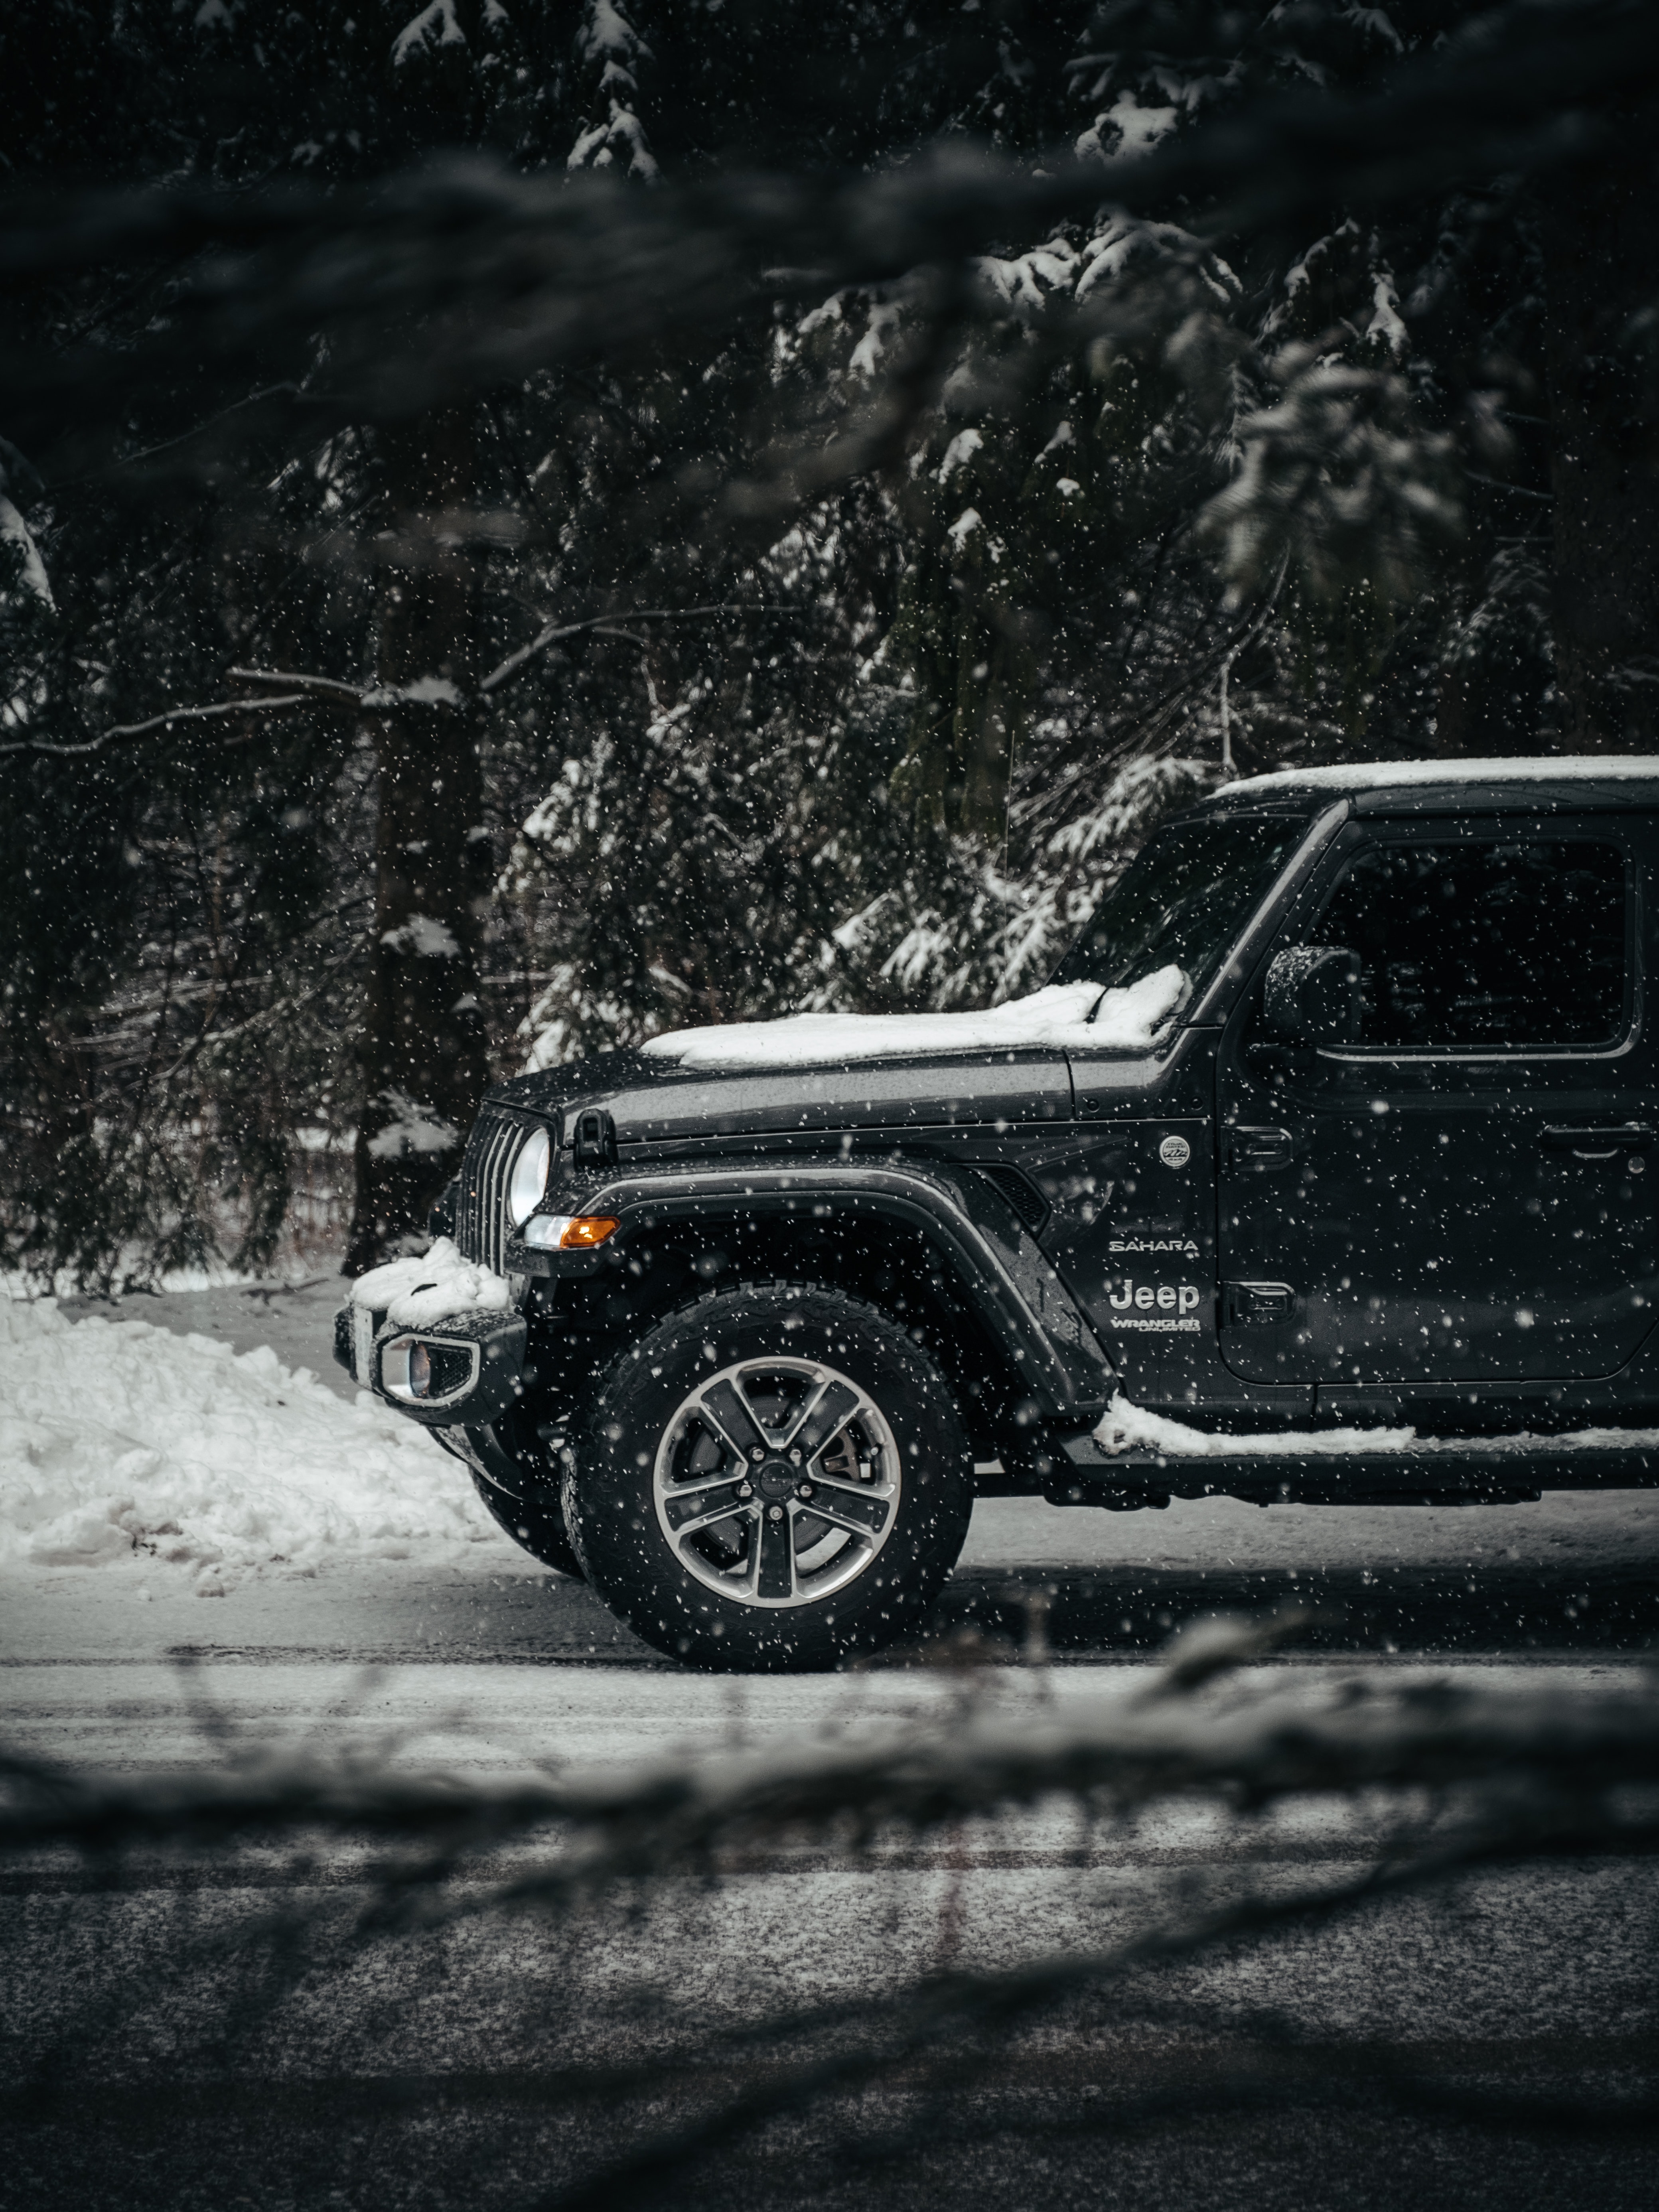 1080p Jeep Wrangler Hd Images